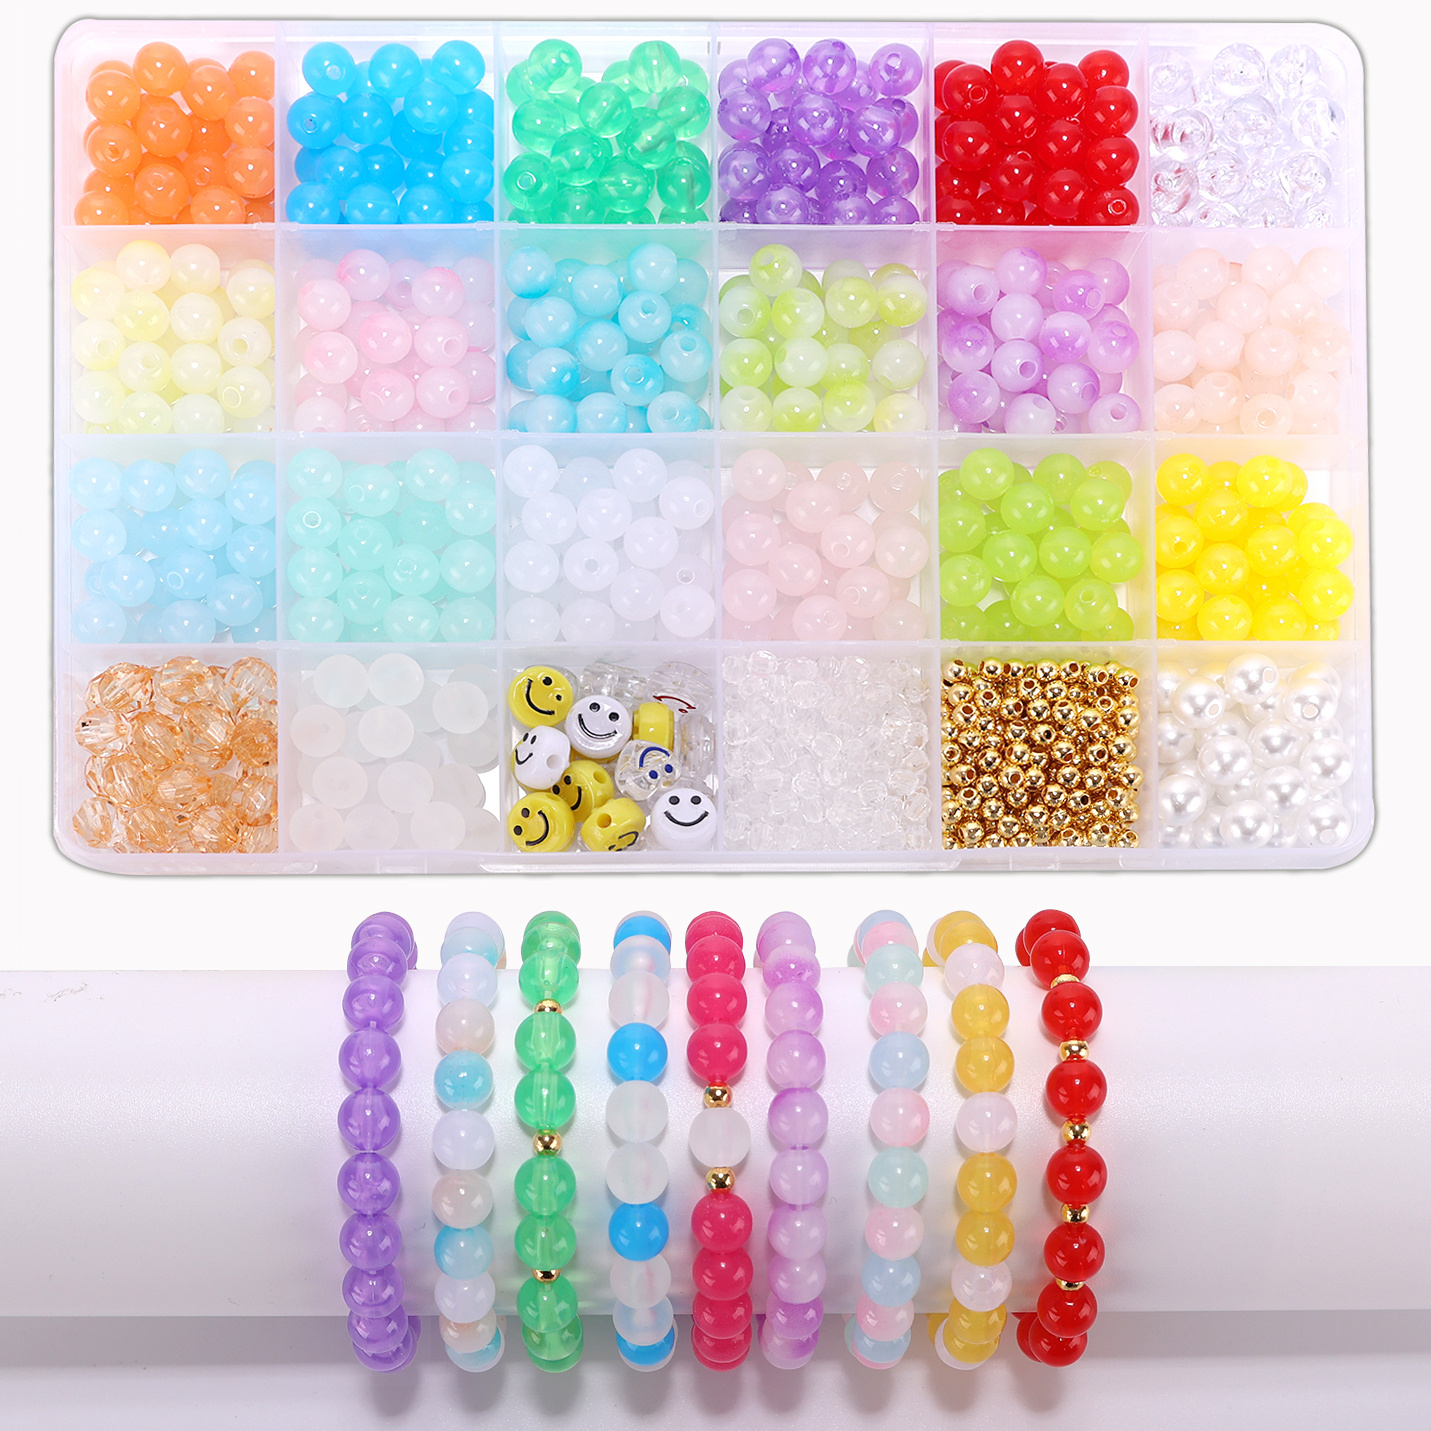 8mm Glass Beads For Jewelry Making Round Crystal Silicone Loose Beads  Bracelet Kit For Bracelets Making, Jewelry Making Earring, Necklaces, And  DIY Crafts From Hc_network, $0.79